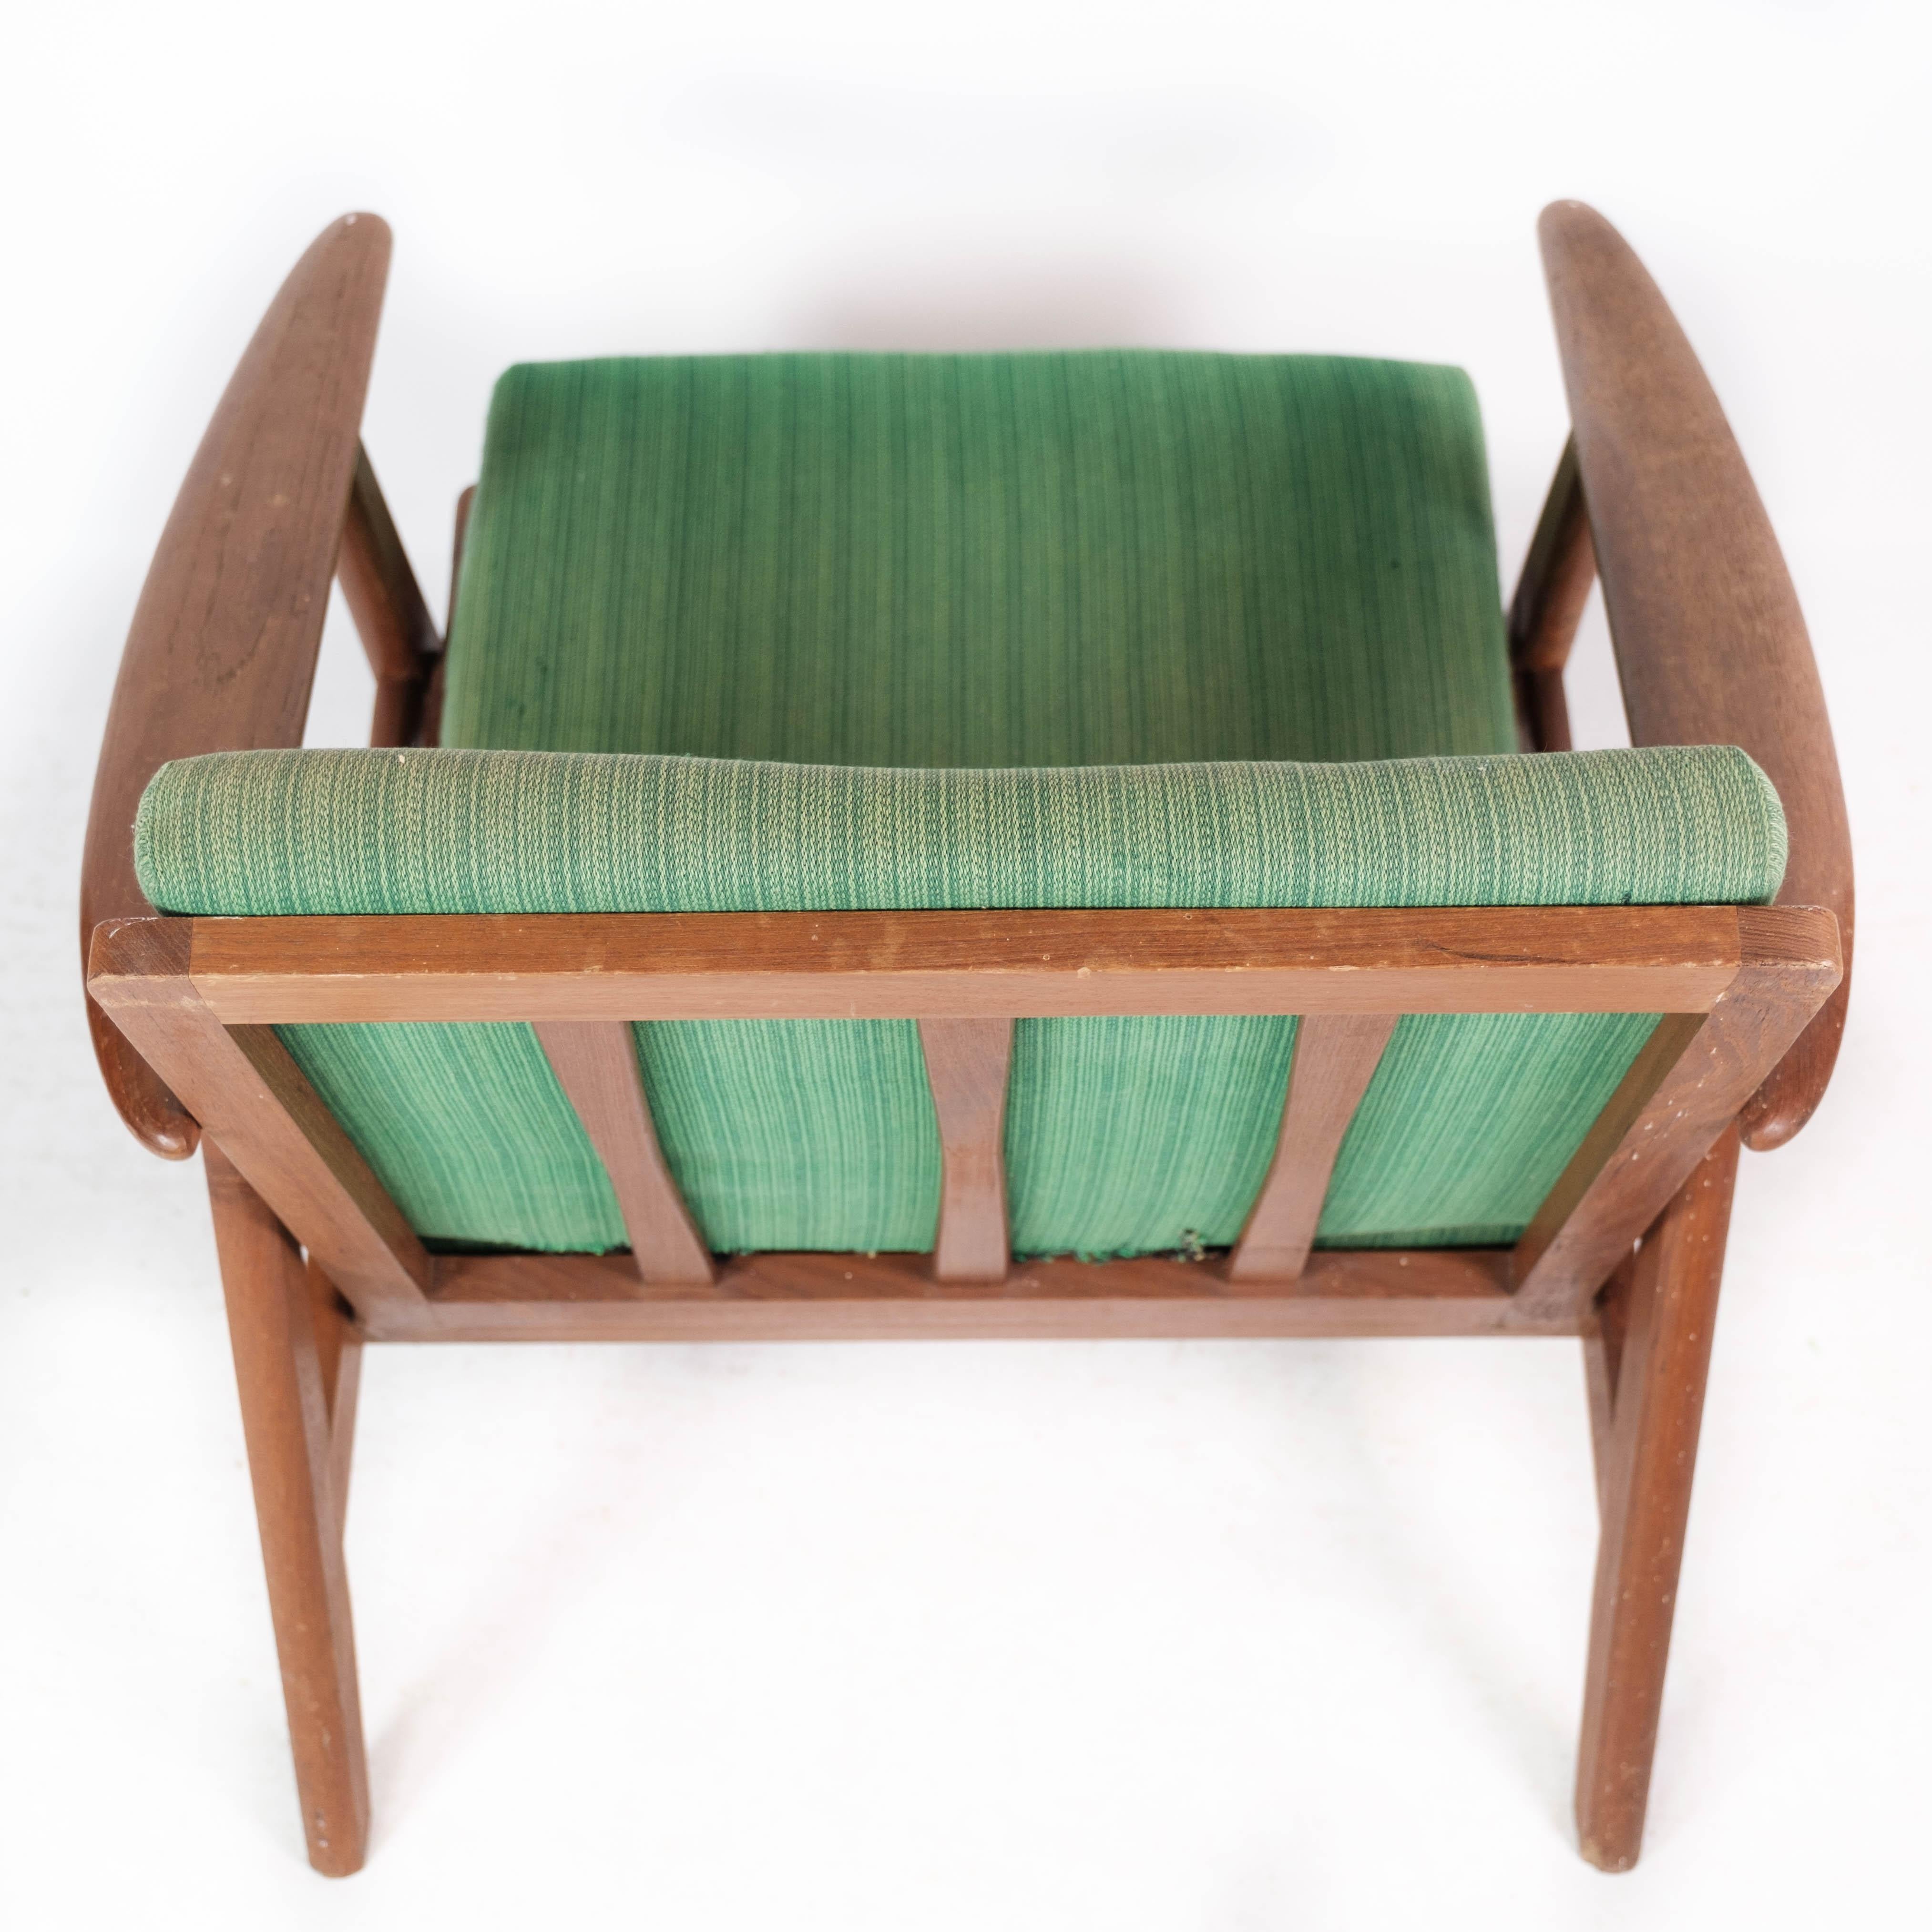 Easy Chair in Teak and with Green Upholstery of Danish Design from the 1960s For Sale 1